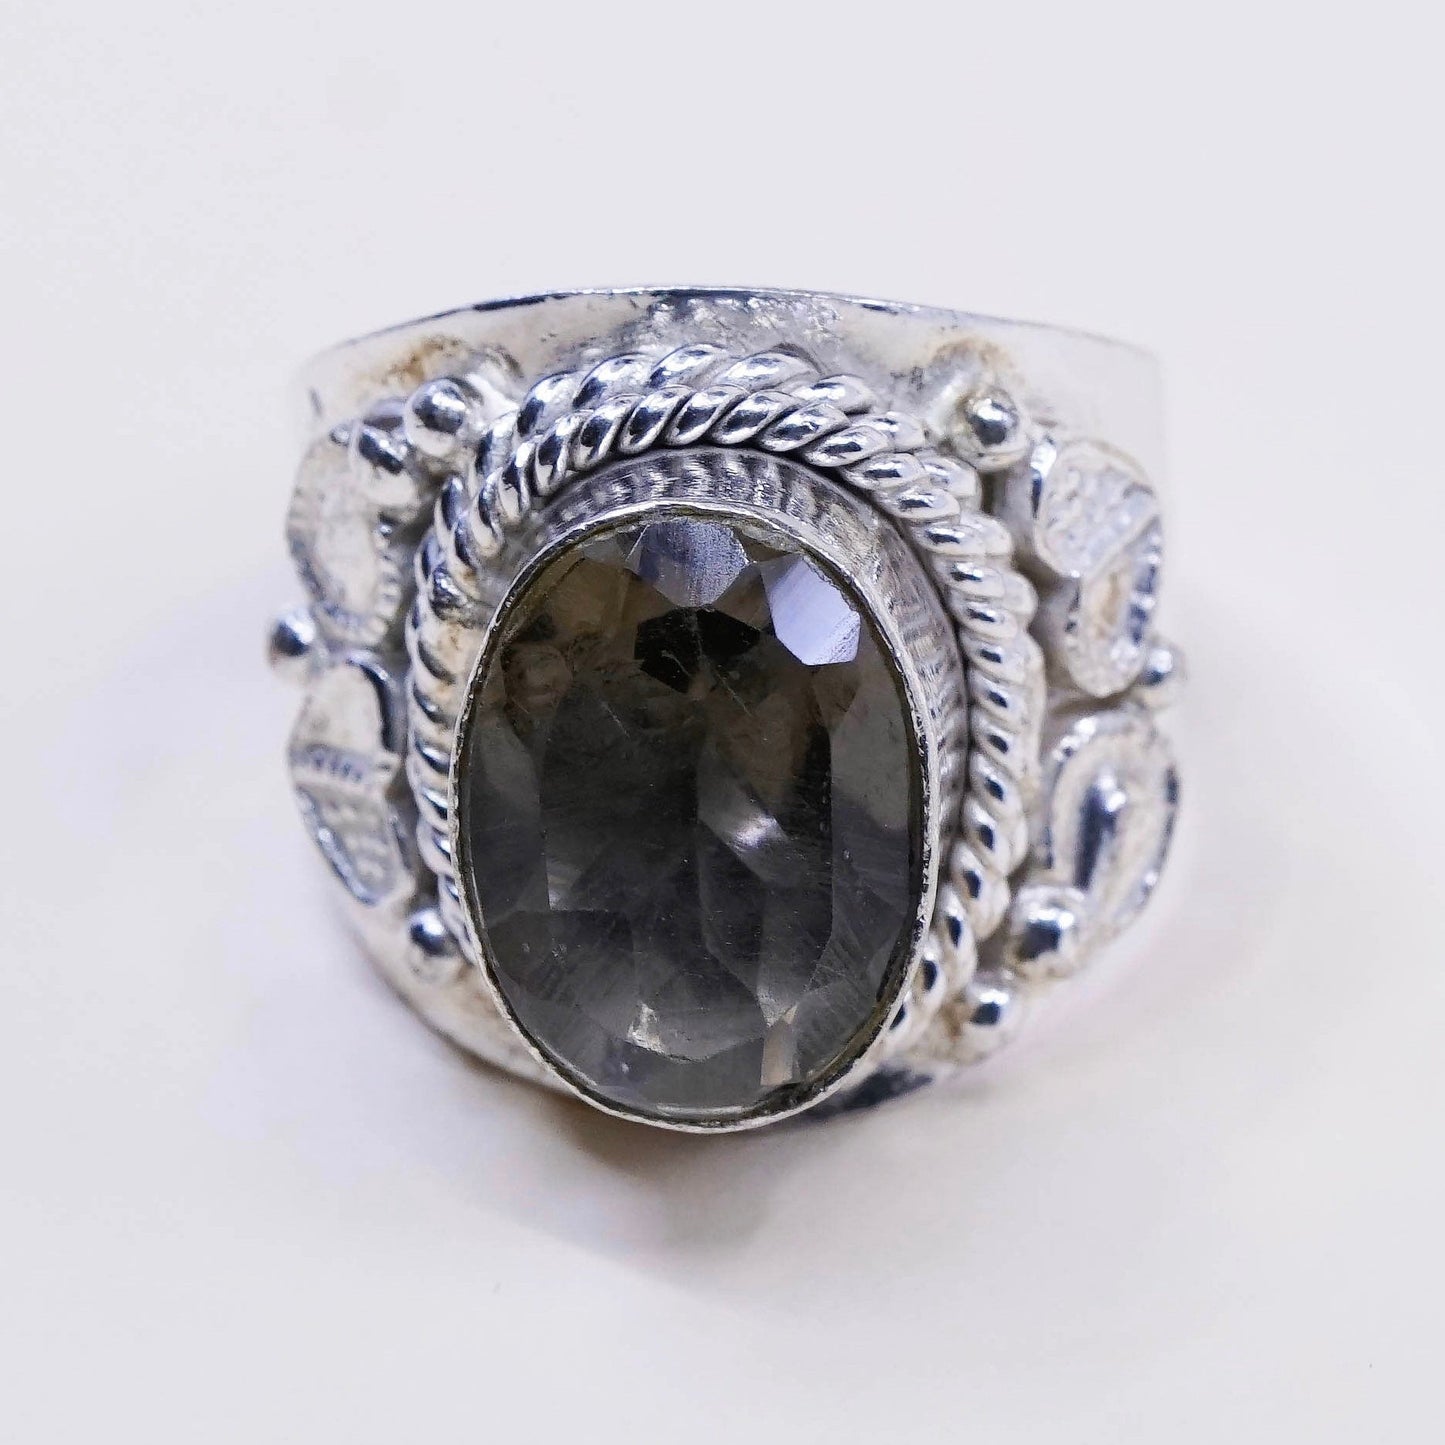 Size 9, vtg sterling 925 silver handmade statement ring w/ smoky topaz N cable